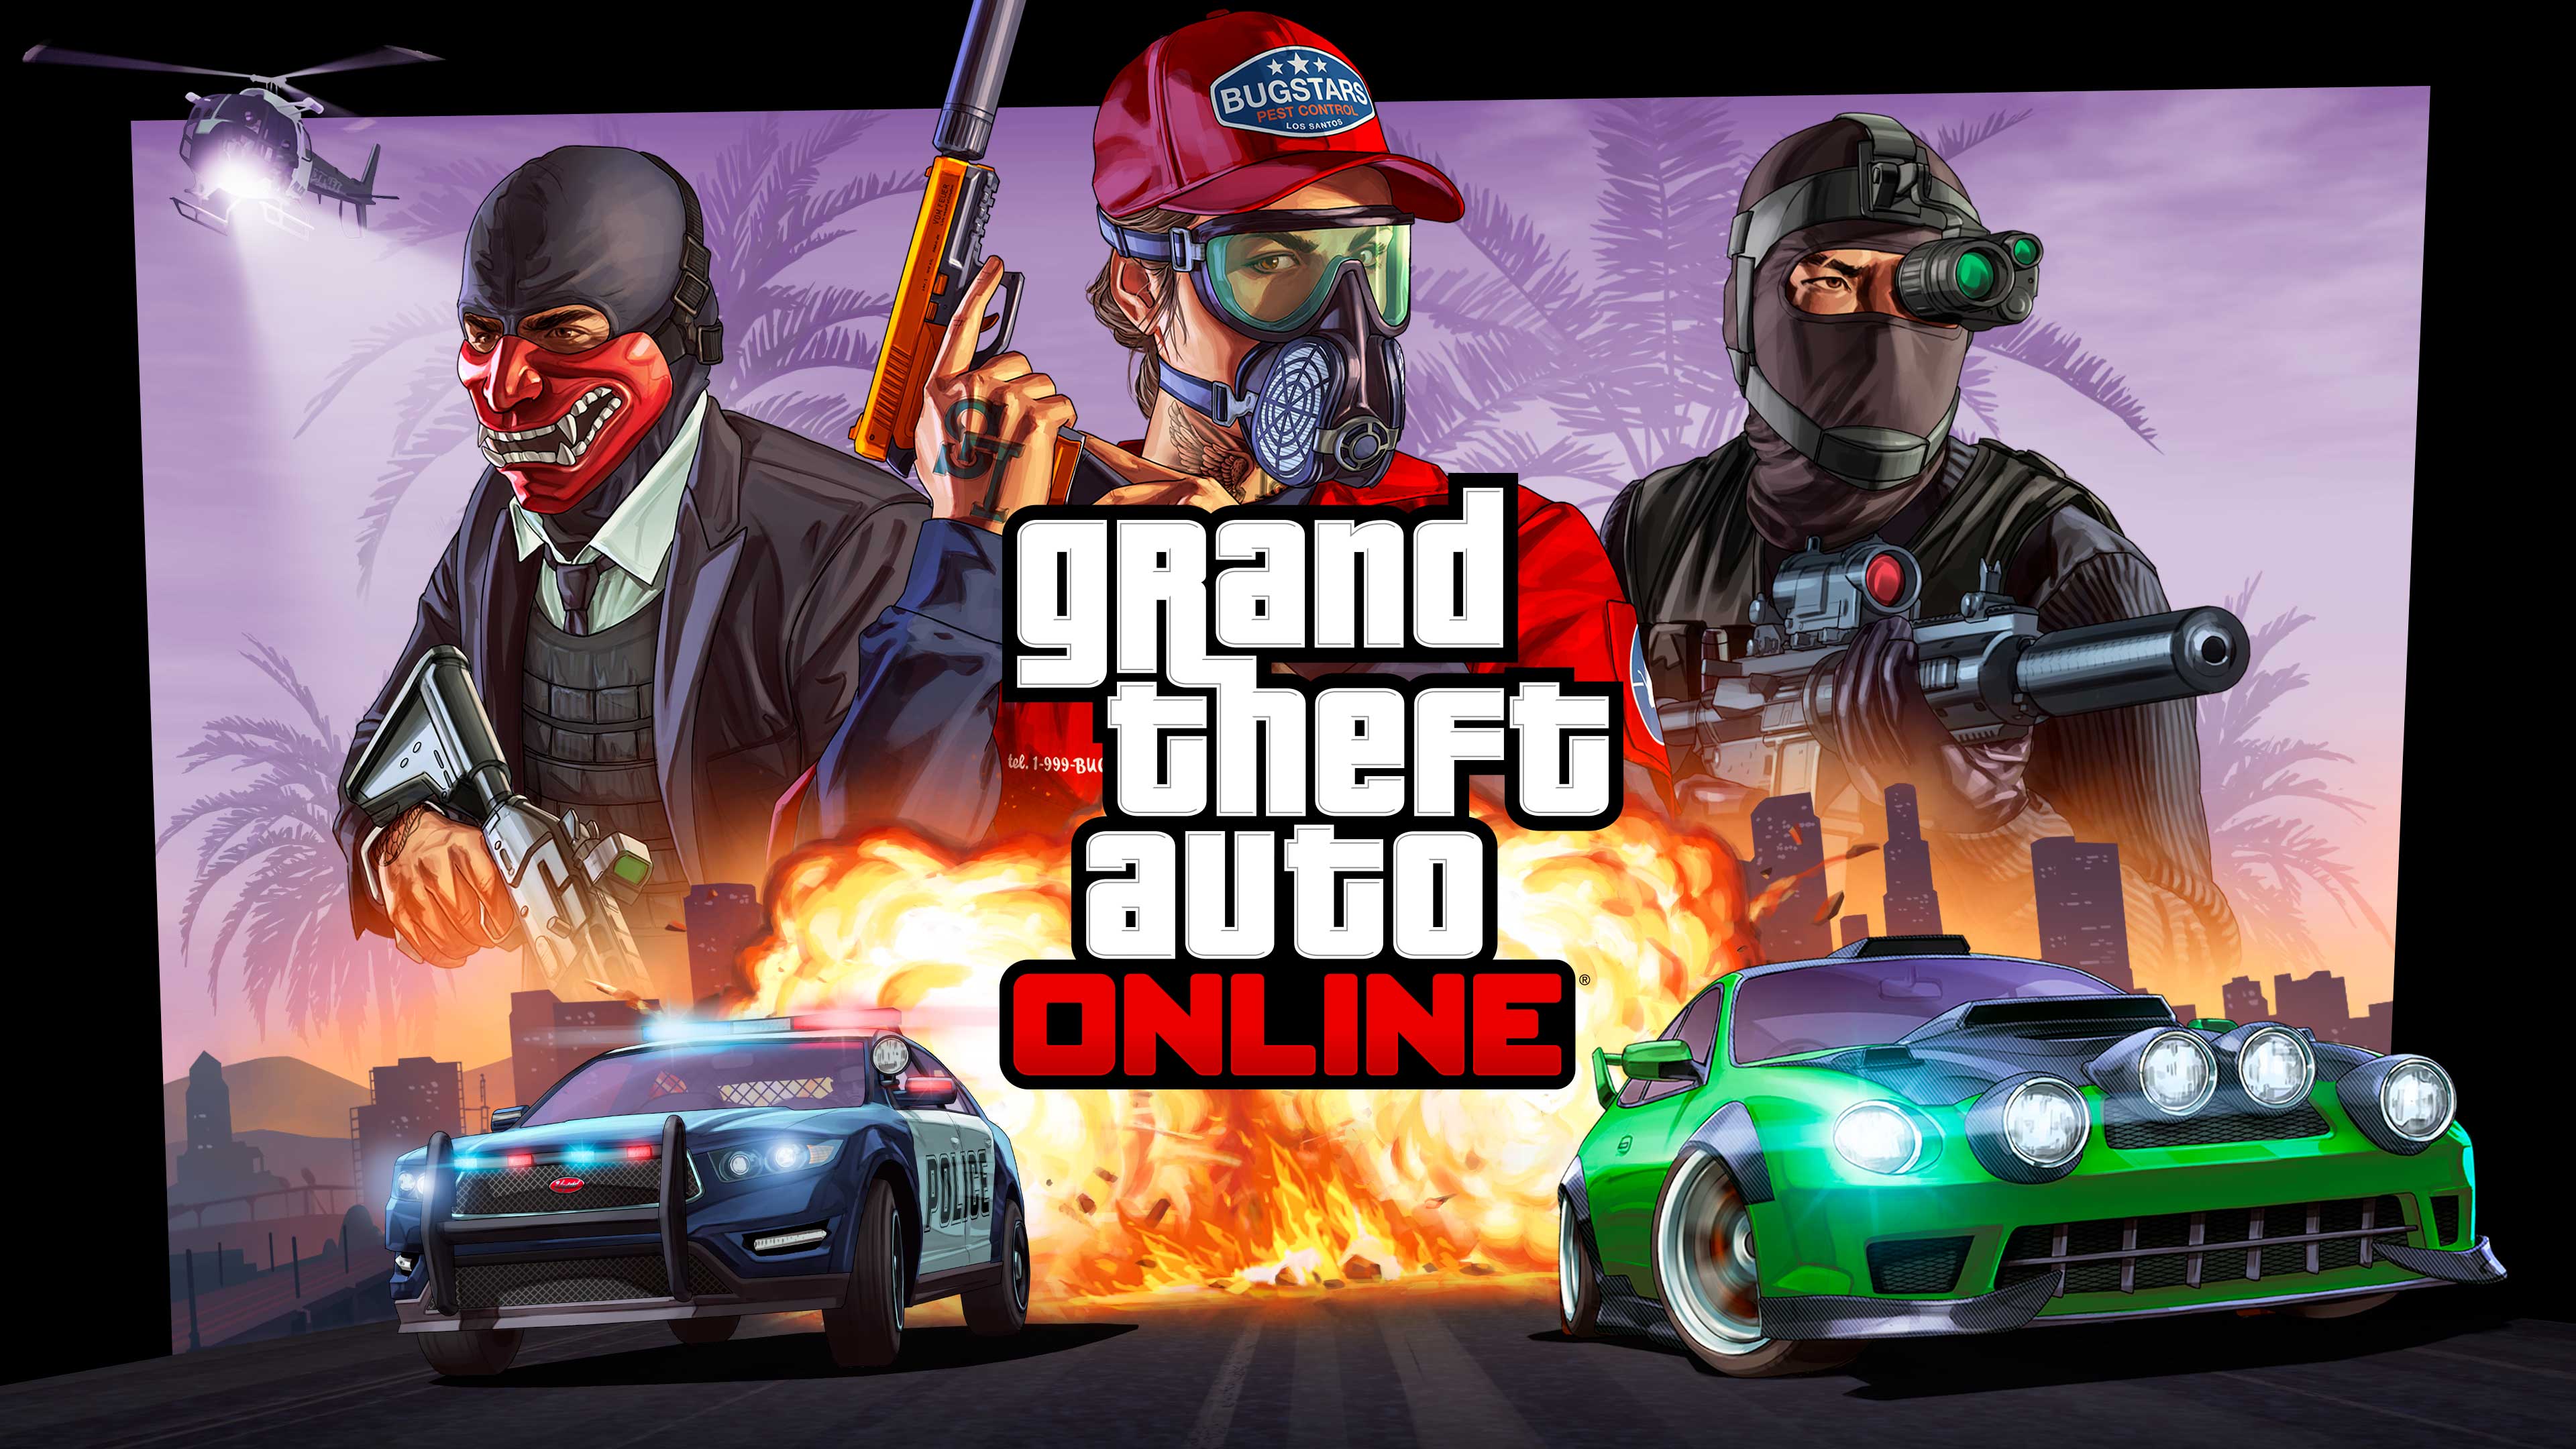 PlayStation on X: GTAV and GTA Online have launched on PS5. Players can  get GTA Online for free on PS5 through June 14. Players without an active  PlayStation Plus subscription can play